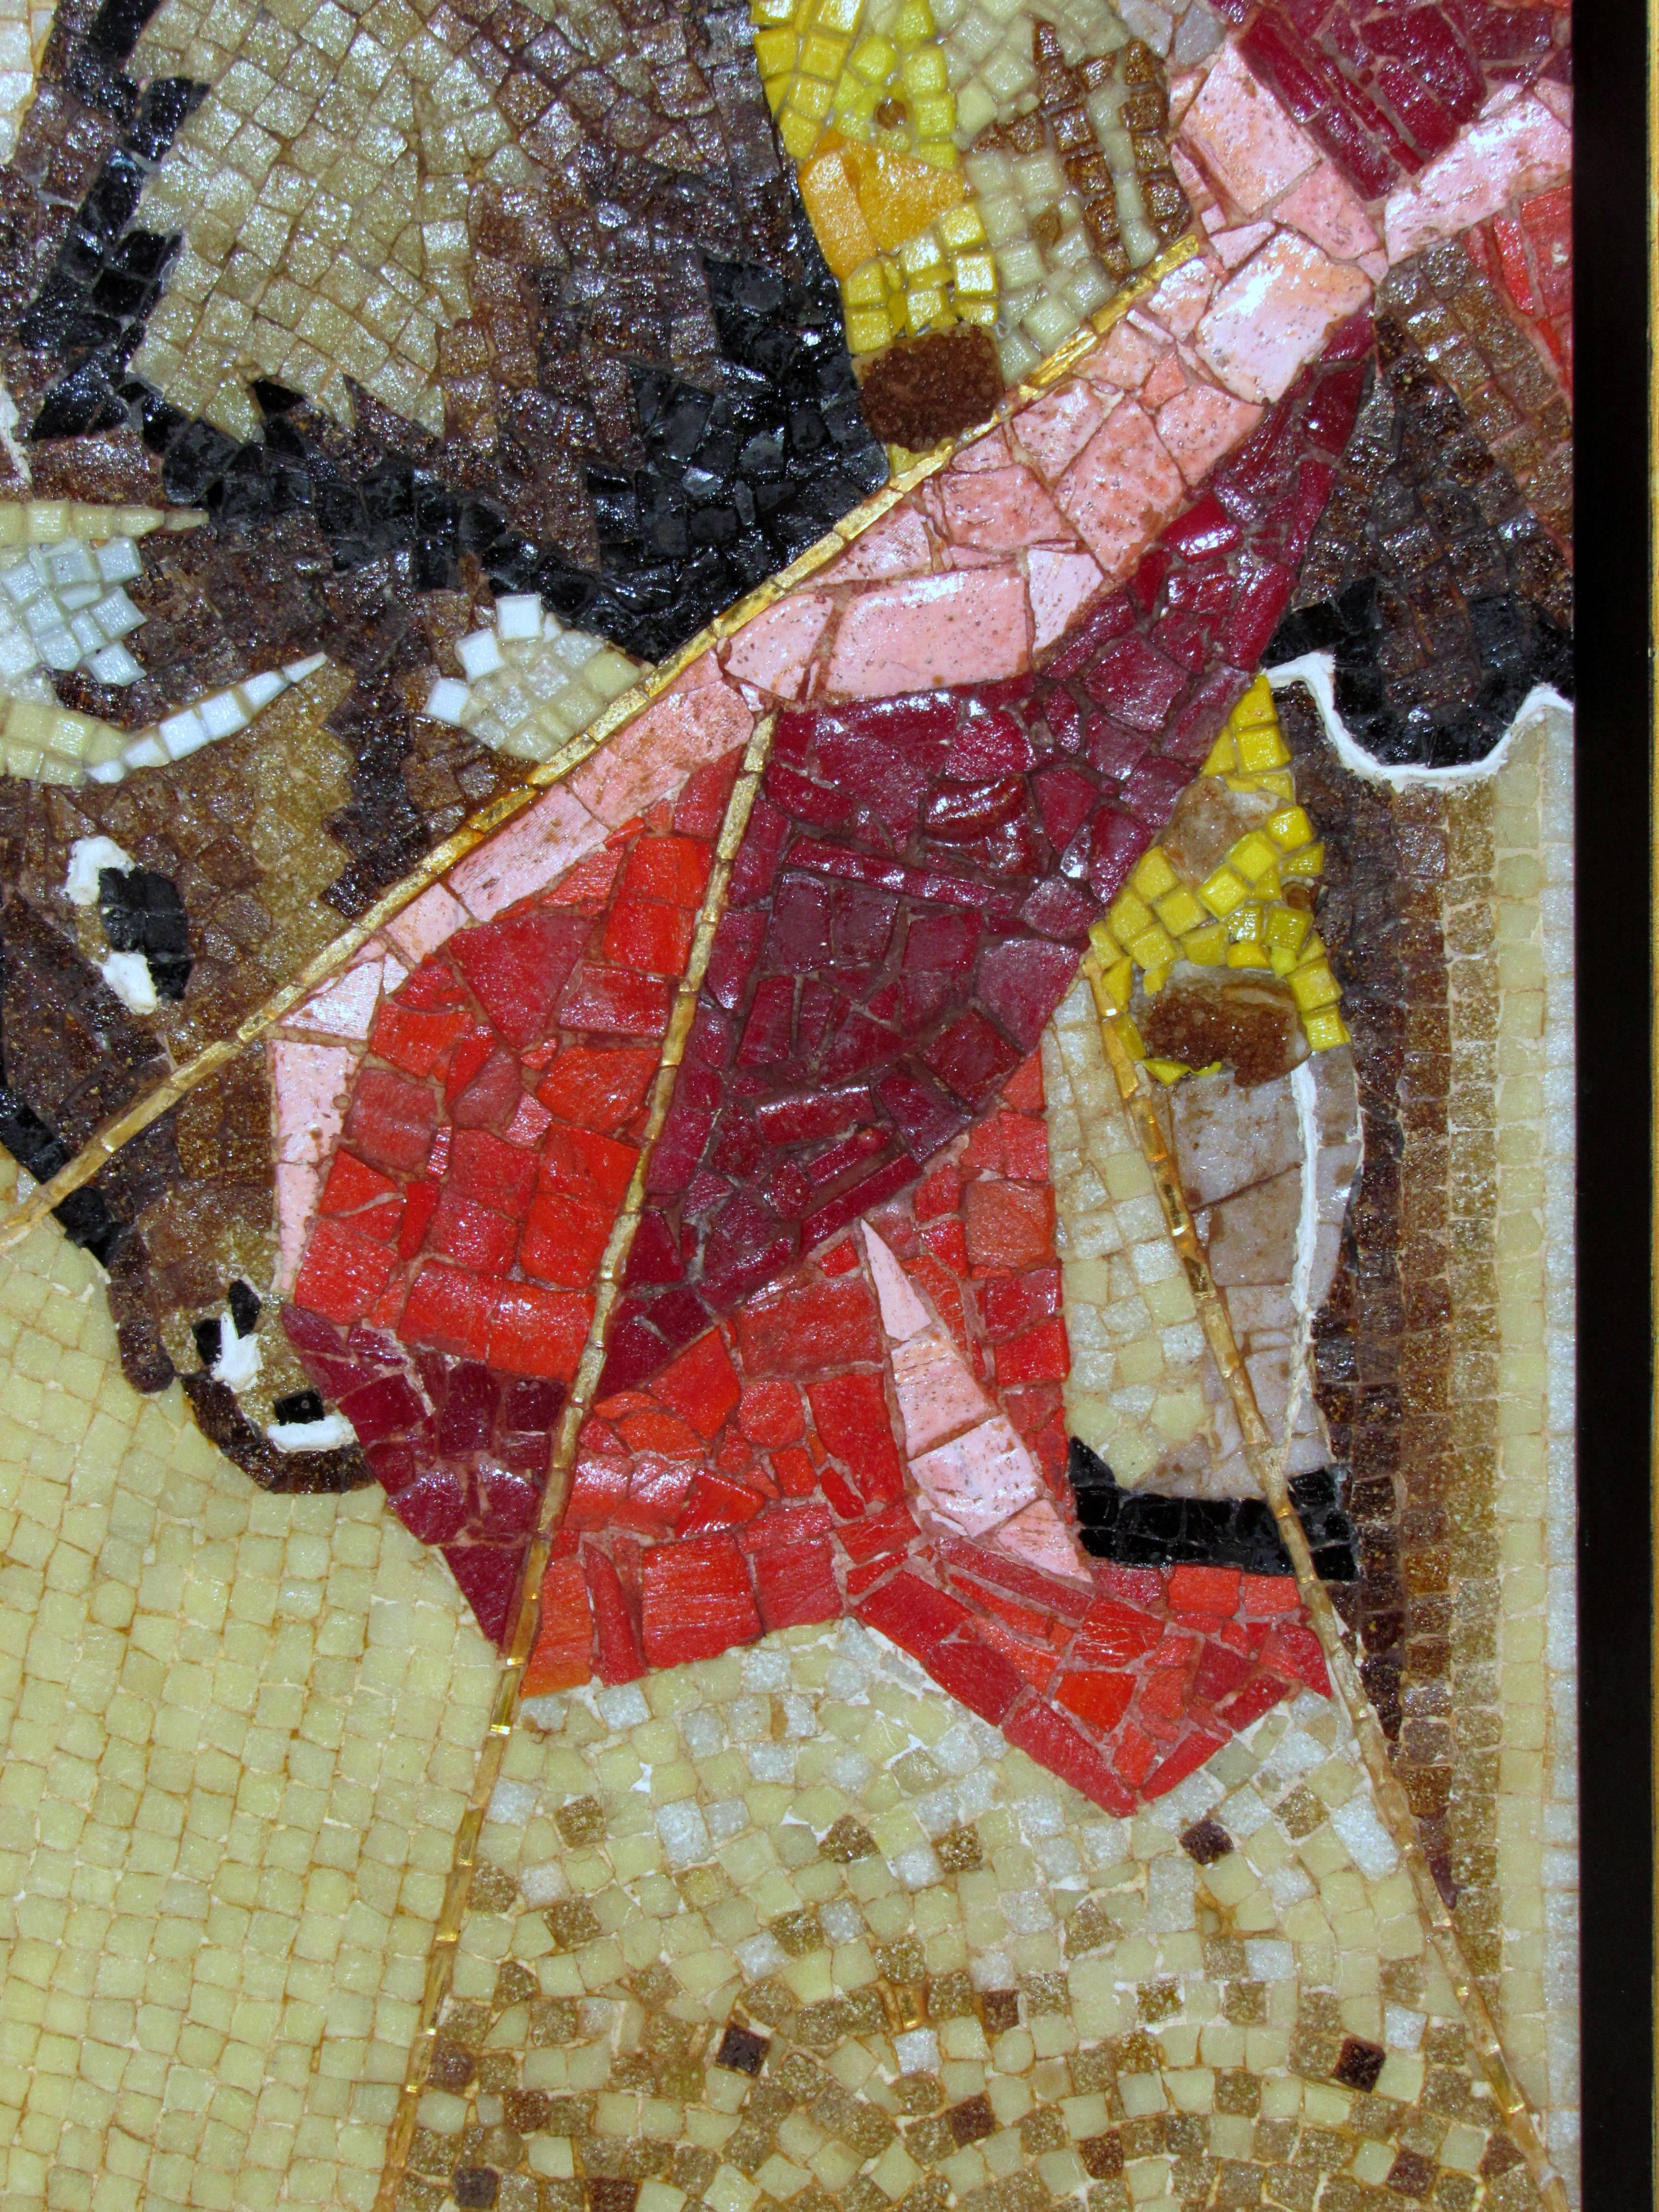 Rare unusual mosaic of glass tile with chunks of mineral and mineral chips creating a matador in a close encounter with a bull. The composition is segmented by straight lines of thin gilt mirrored tiles. Created in Mexico by one of its masters of